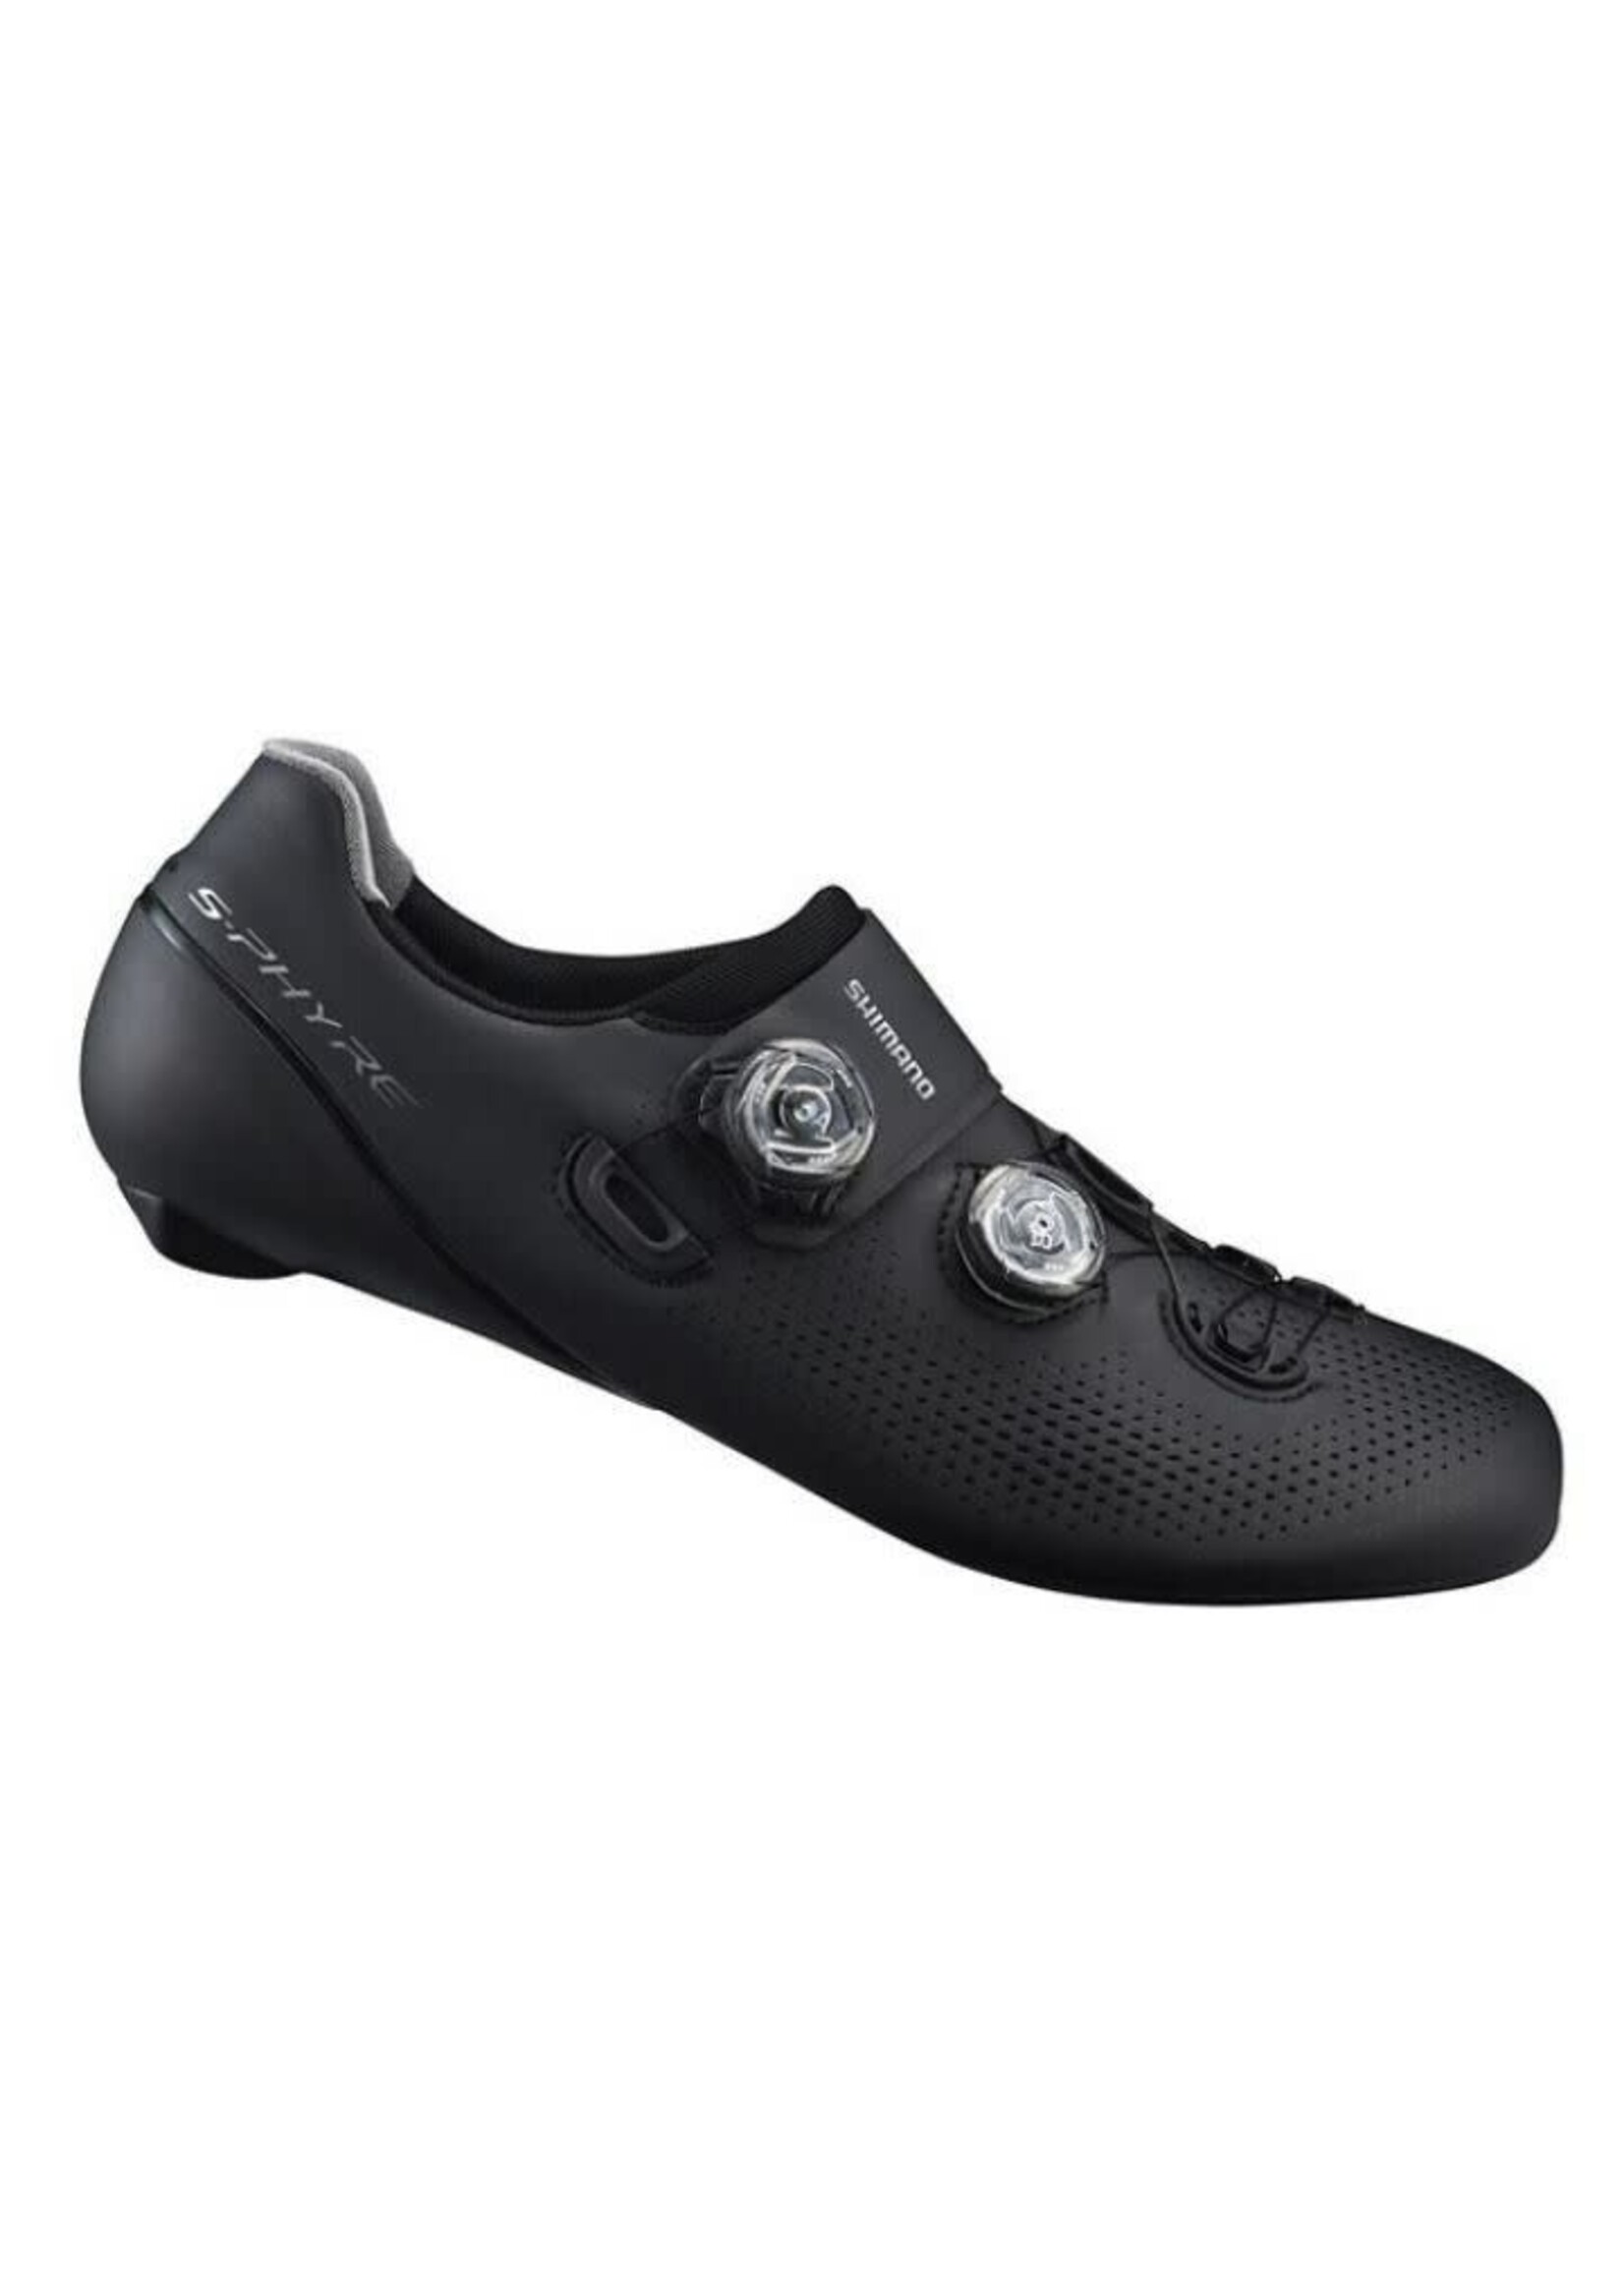 Shimano SH-RC901 S-PHYRE BICYCLE SHOES BLACK 41.0